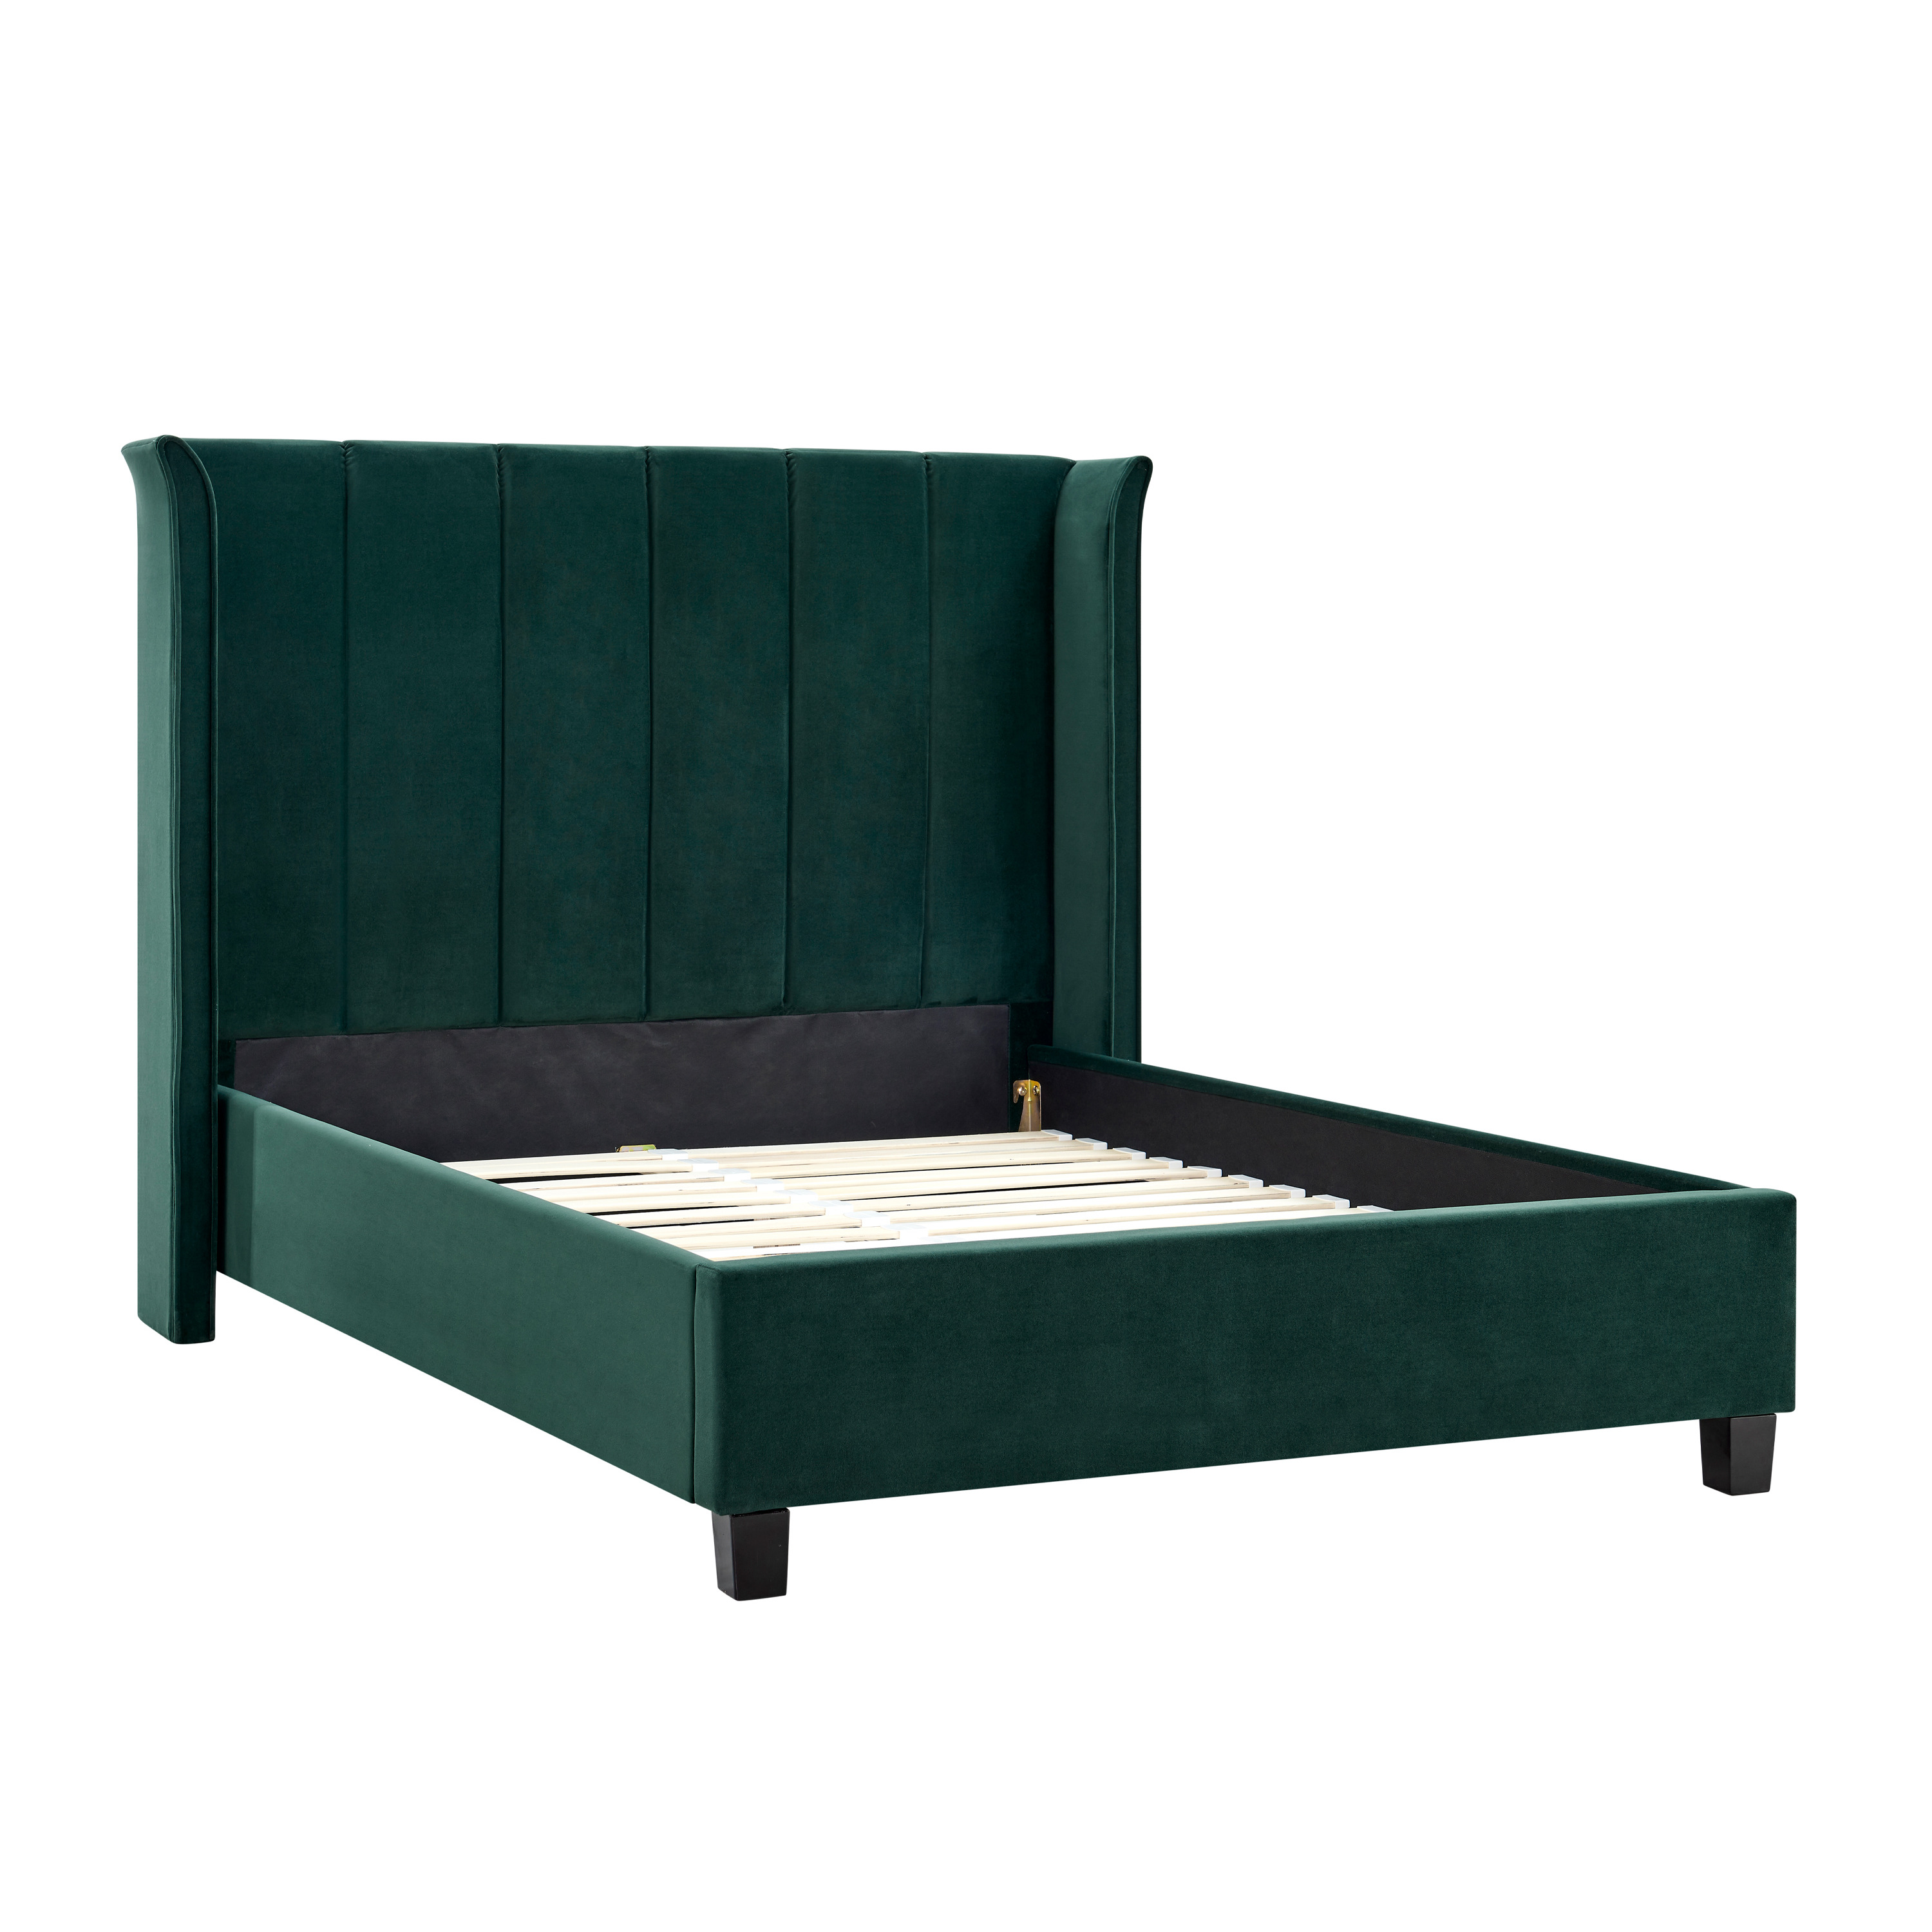 Limelight Polaris Recycle Fabric Bed Frame Emerald Green Double